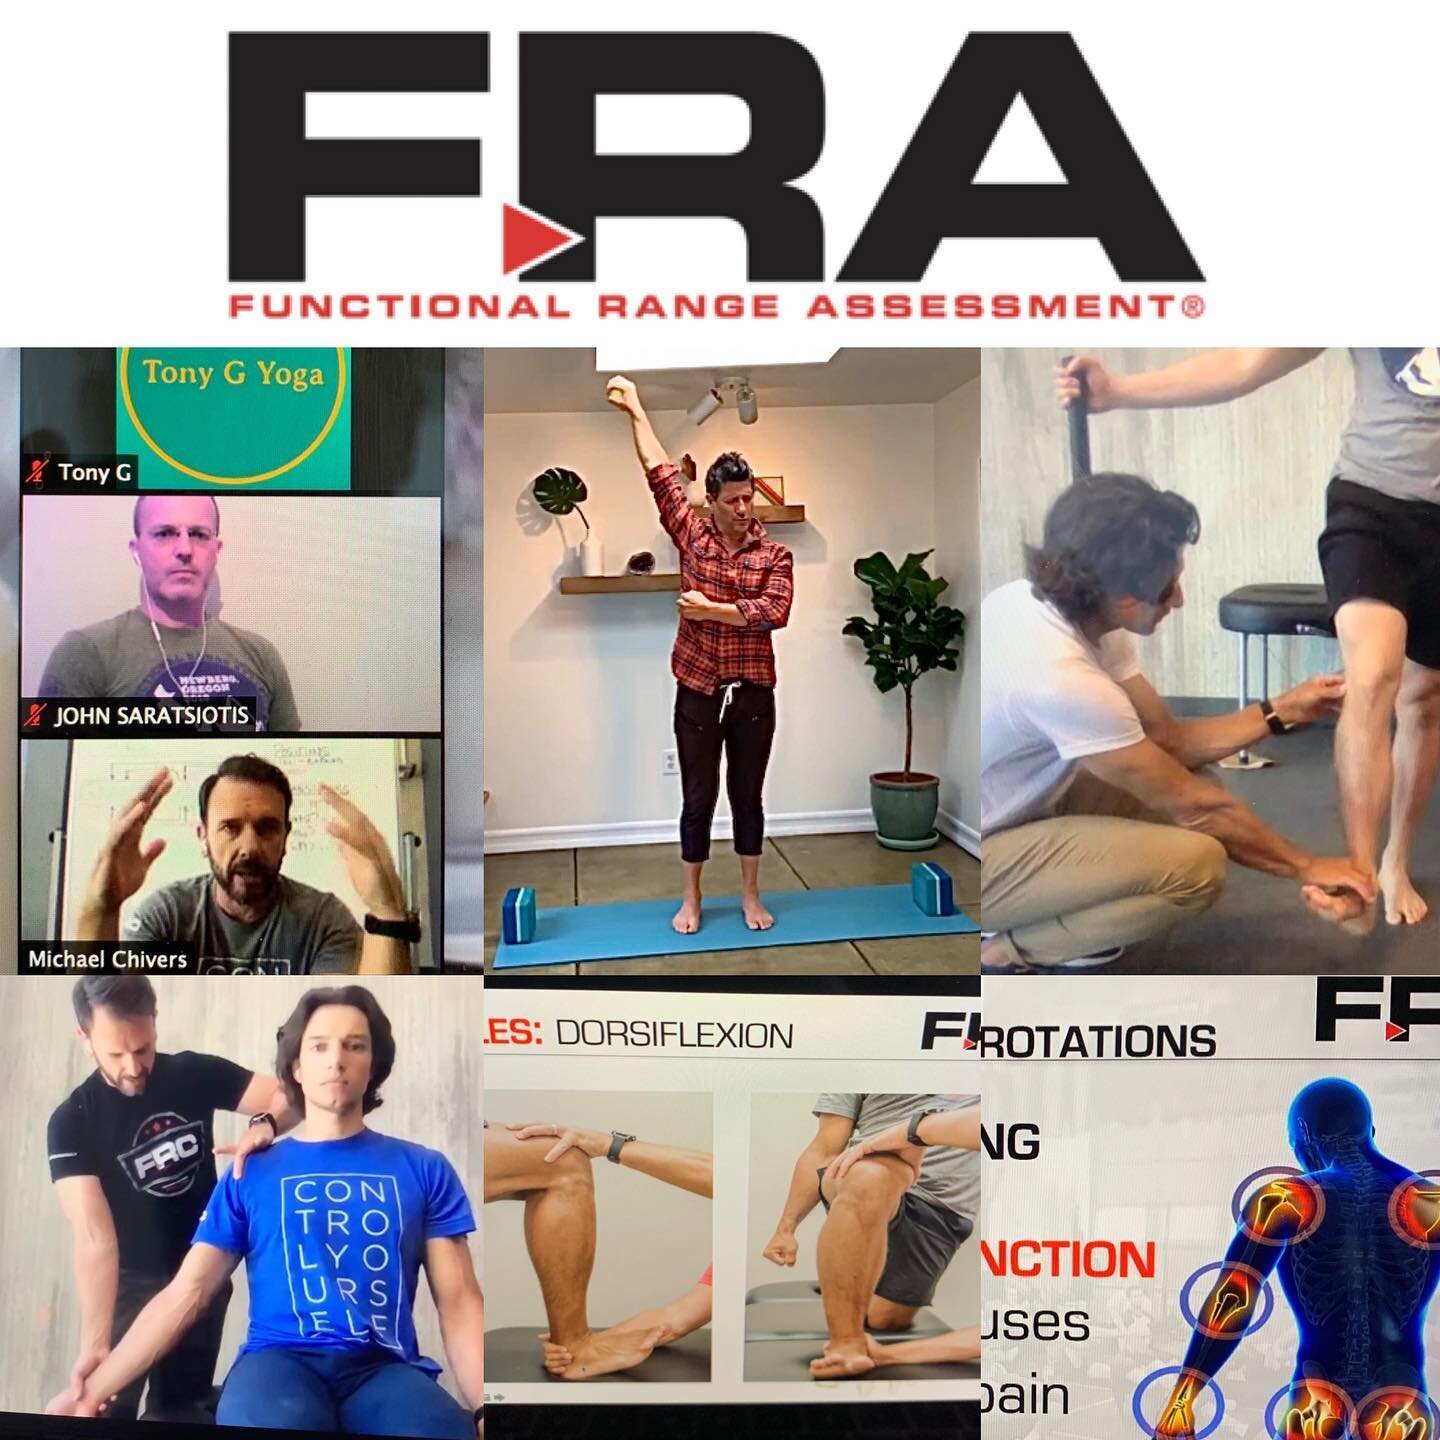 I feel very blessed to have been able to spend the weekend studying and learning from my friends at @kinstretch. This is my 3rd course with them called FRA (Functional Range Assessment) and once again they did such a brilliant job delivering some pre